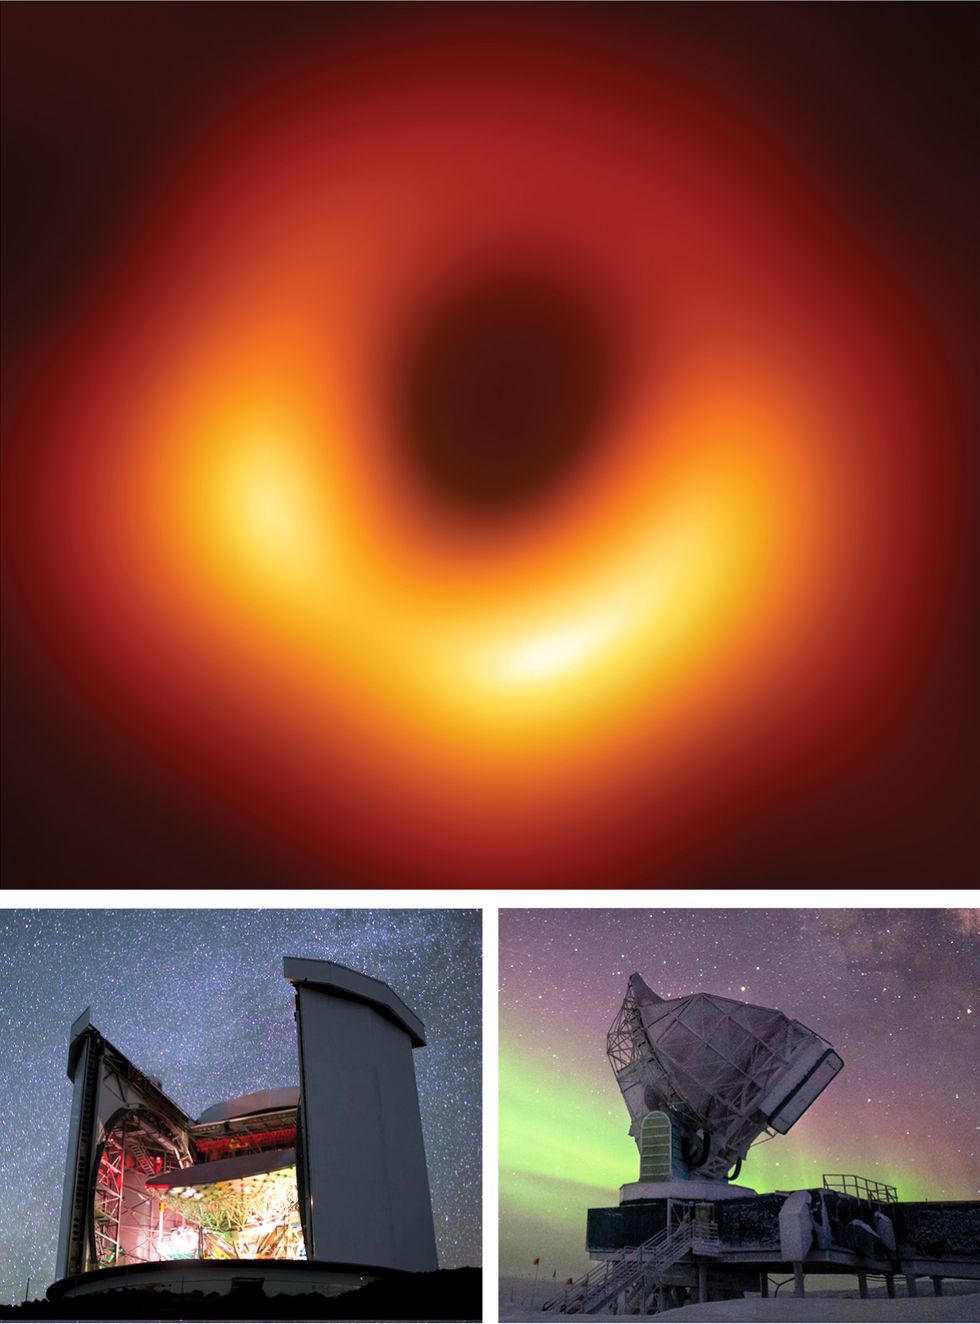 Last year, scientists published images of a black hole called M87* (top). The data that went into constructing those images came from seven radio telescopes spread over the globe, including the James Clerk Maxwell Telescope, in Hawaii (left). Another telescope, at the South Pole (right), aided in the calibration of the telescope network and is used for observing other astronomical sources.